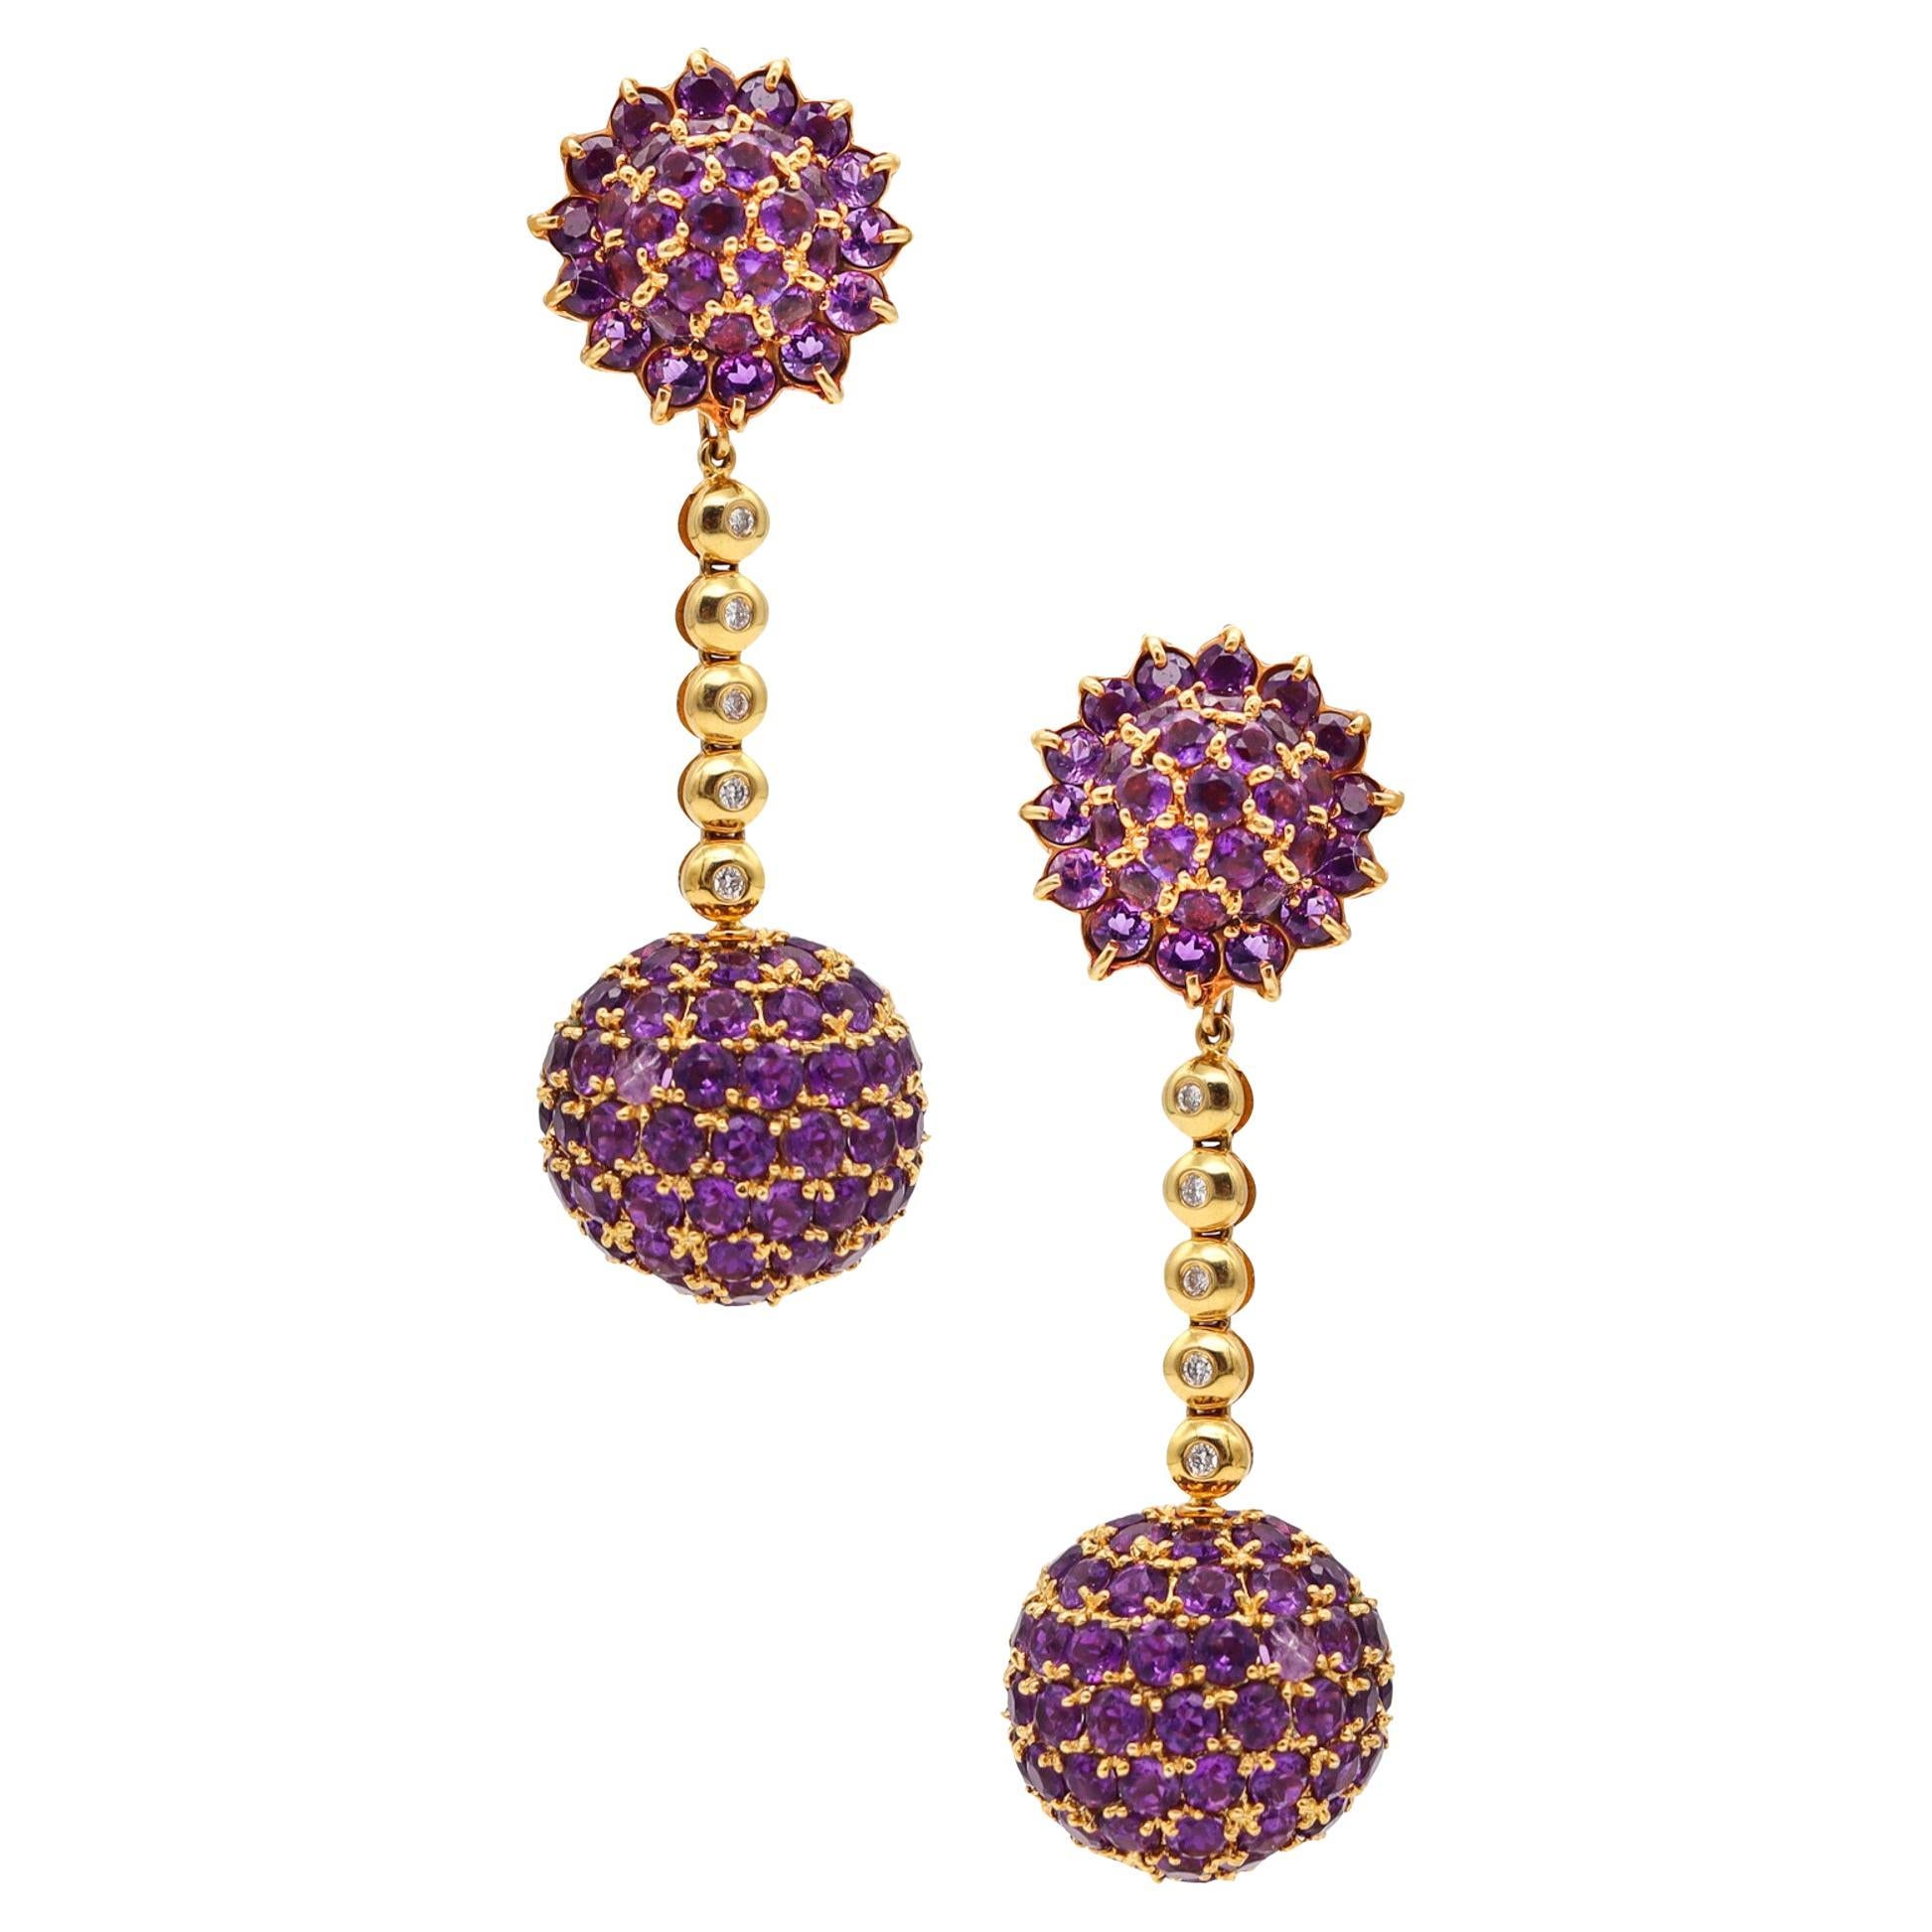 Salavetti Dangle Drops Convertible Earrings in 18kt Gold with 24.35ctw Amethyst